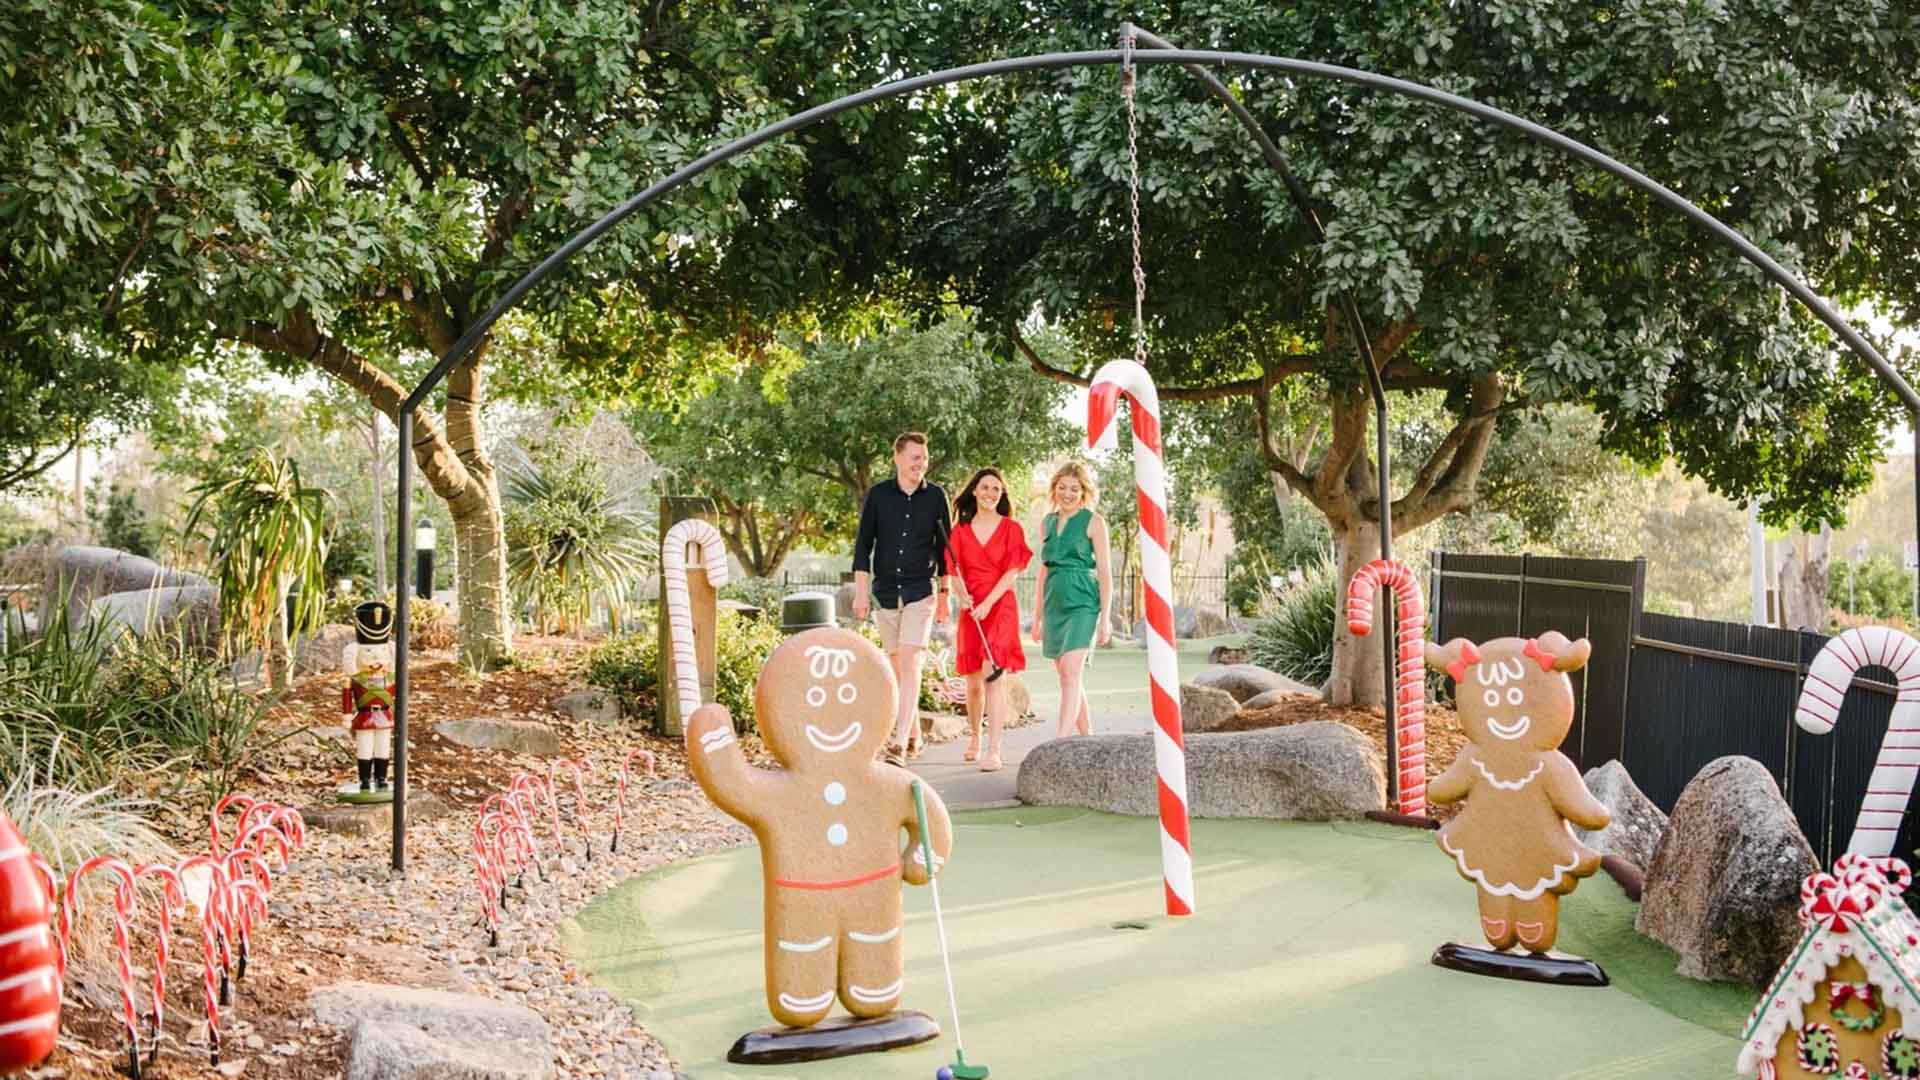 Victoria Park Is Bringing Back Its Christmas-Themed Mini Golf Course to Fill You Full of Festive Cheer